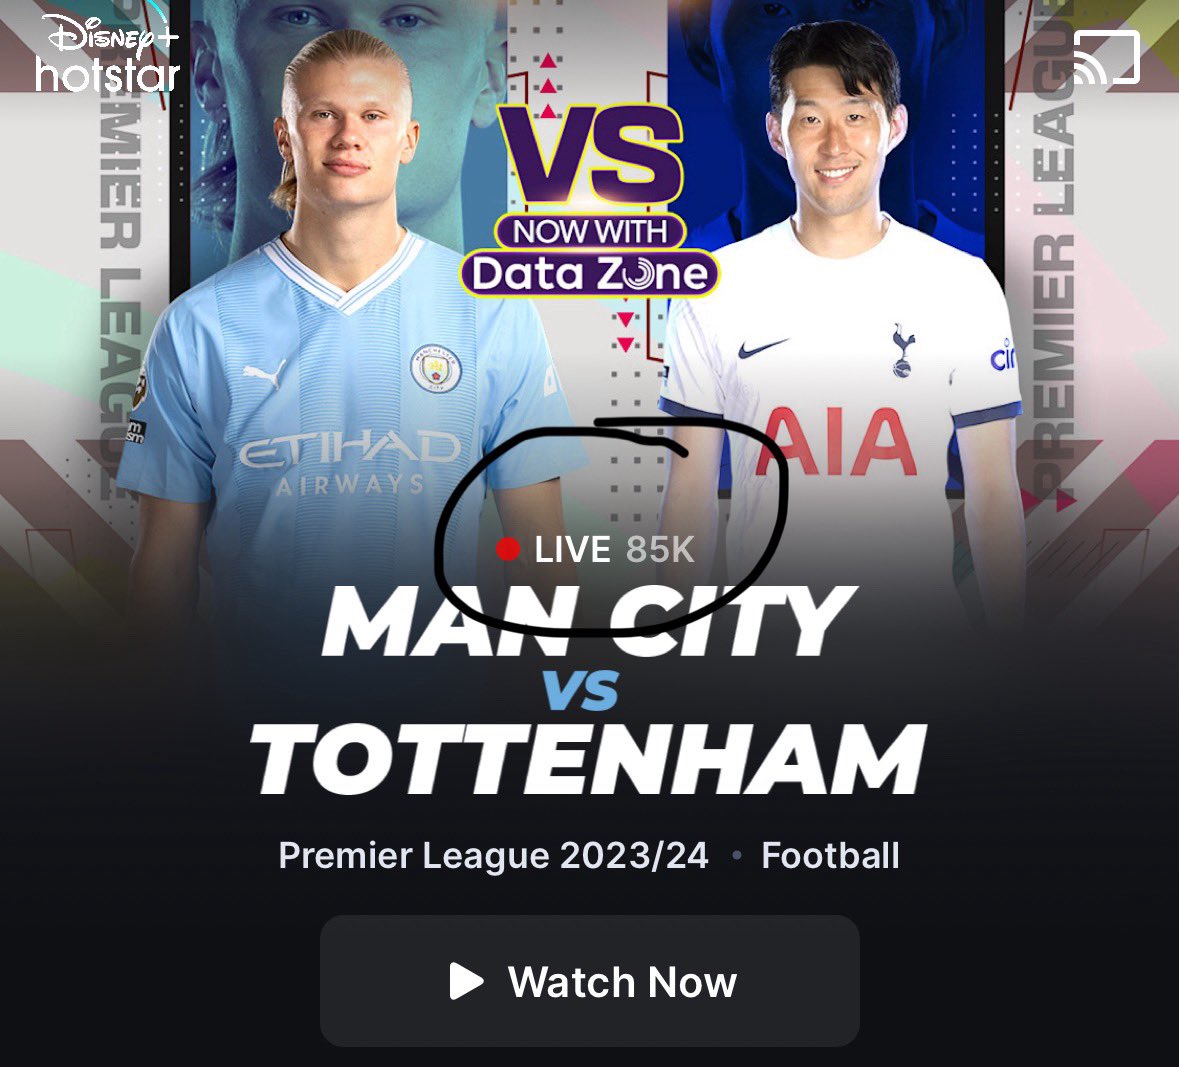 Sunday evening 10 pm. Pro Kabaddi and EPL Football (with two top teams) both on the same OTT platform. PKL has almost 1 million live viewers, 10x of football! India’s homegrown sport!